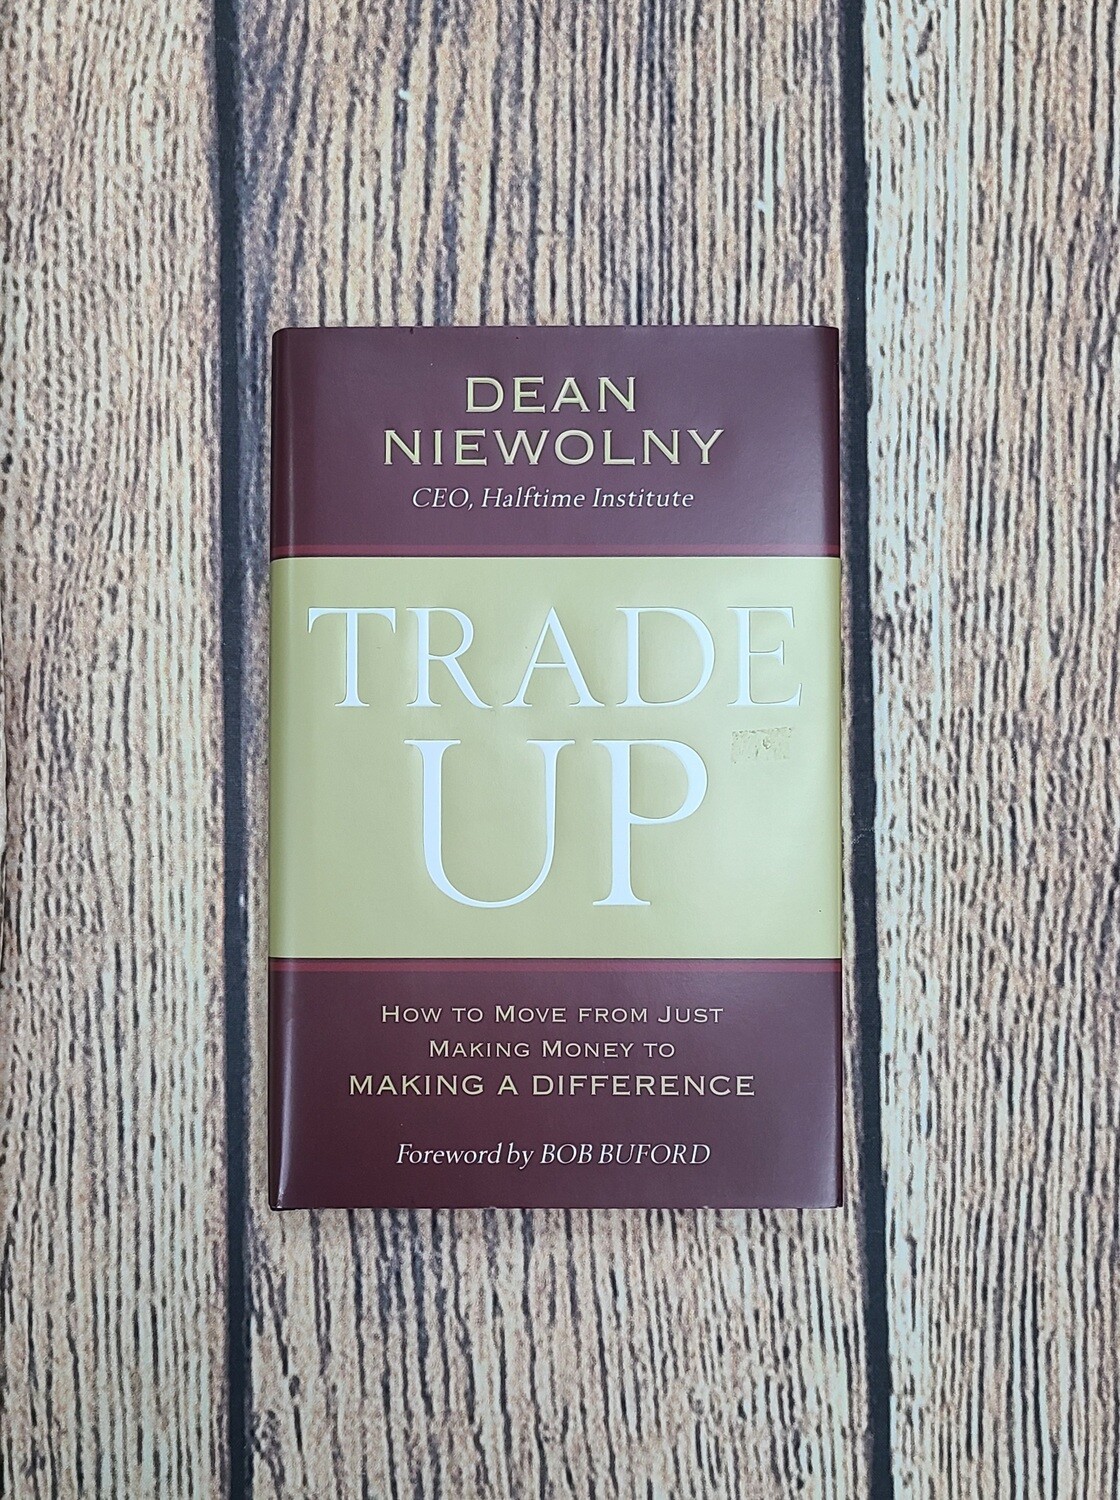 Trade Up: How to Move from Just Making Money to Making a Difference by Dean Niewolny and Bob Buford